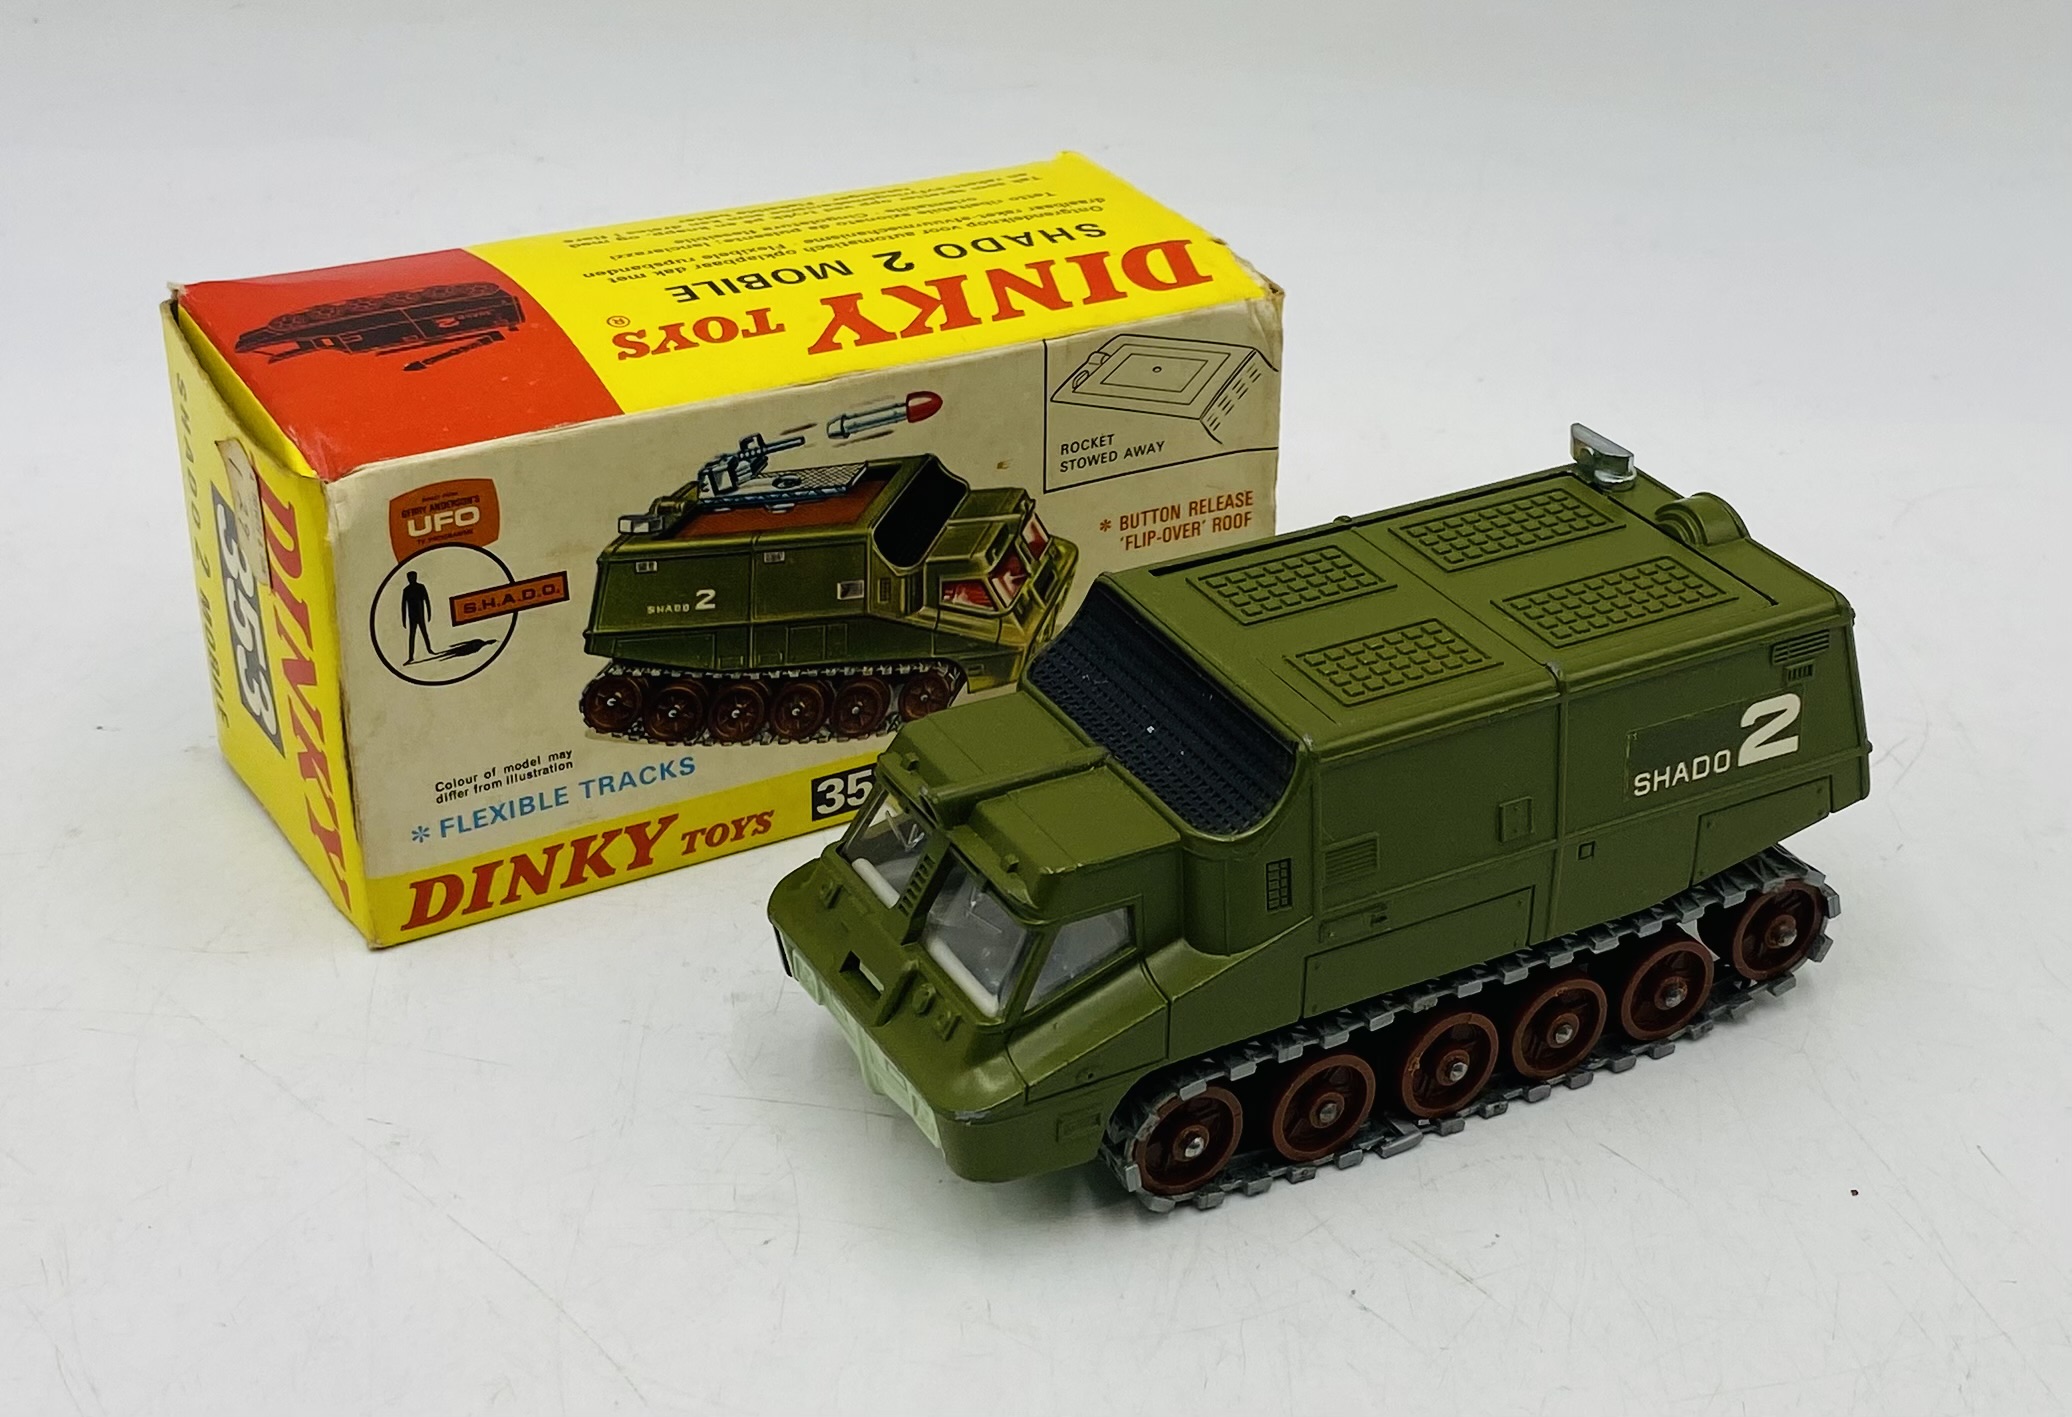 A vintage boxed Dinky Toys "Shado 2 Mobile" die-cast model (No 353)